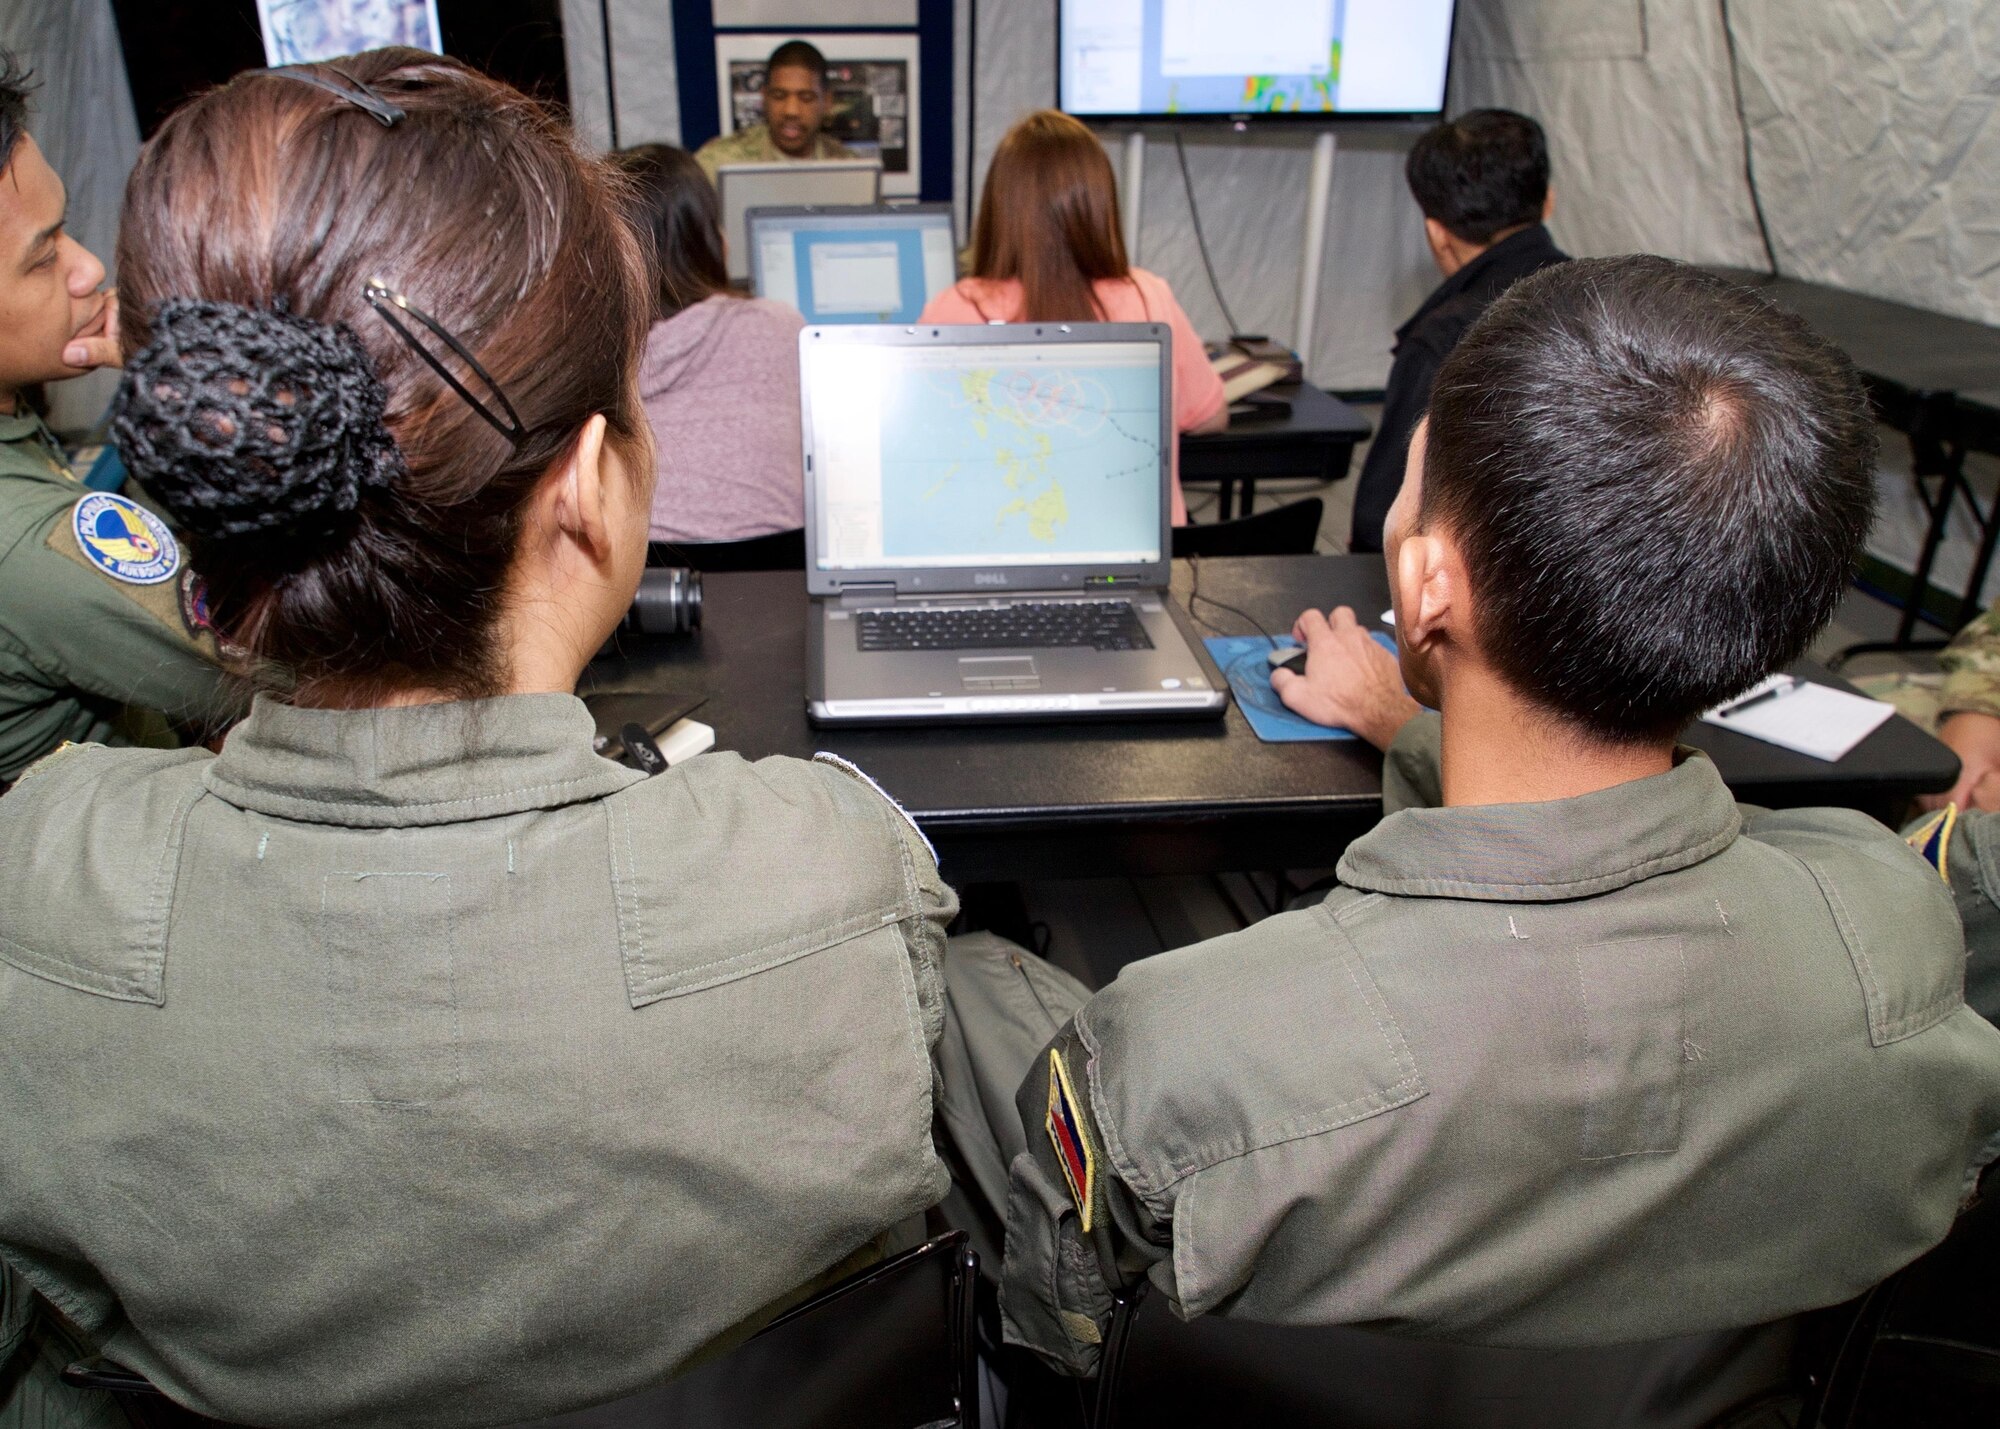 Philippine Air Force aerial reconnaissance photographers, Sgt. Charisma Navarro (left) and Tech. Sgt. Primitivio Cedi Jr. (right), review geospatial map layers during a software demonstration, Clark Air Base, Philippines, Jan. 20, 2017. Navarro and Cedi are members of an ongoing Subject Matter Expert Exchange (SMEE) between Philippine and U.S. Air Forces. The SMEE concentrates on enhancing the military-to-military relationship and readiness of both nations when conducting Humanitarian Assistance and Disaster Relief operaions common in the Asia-Pacific. (U.S. Air Force photo by Tech. Sgt. James Stewart/Released)